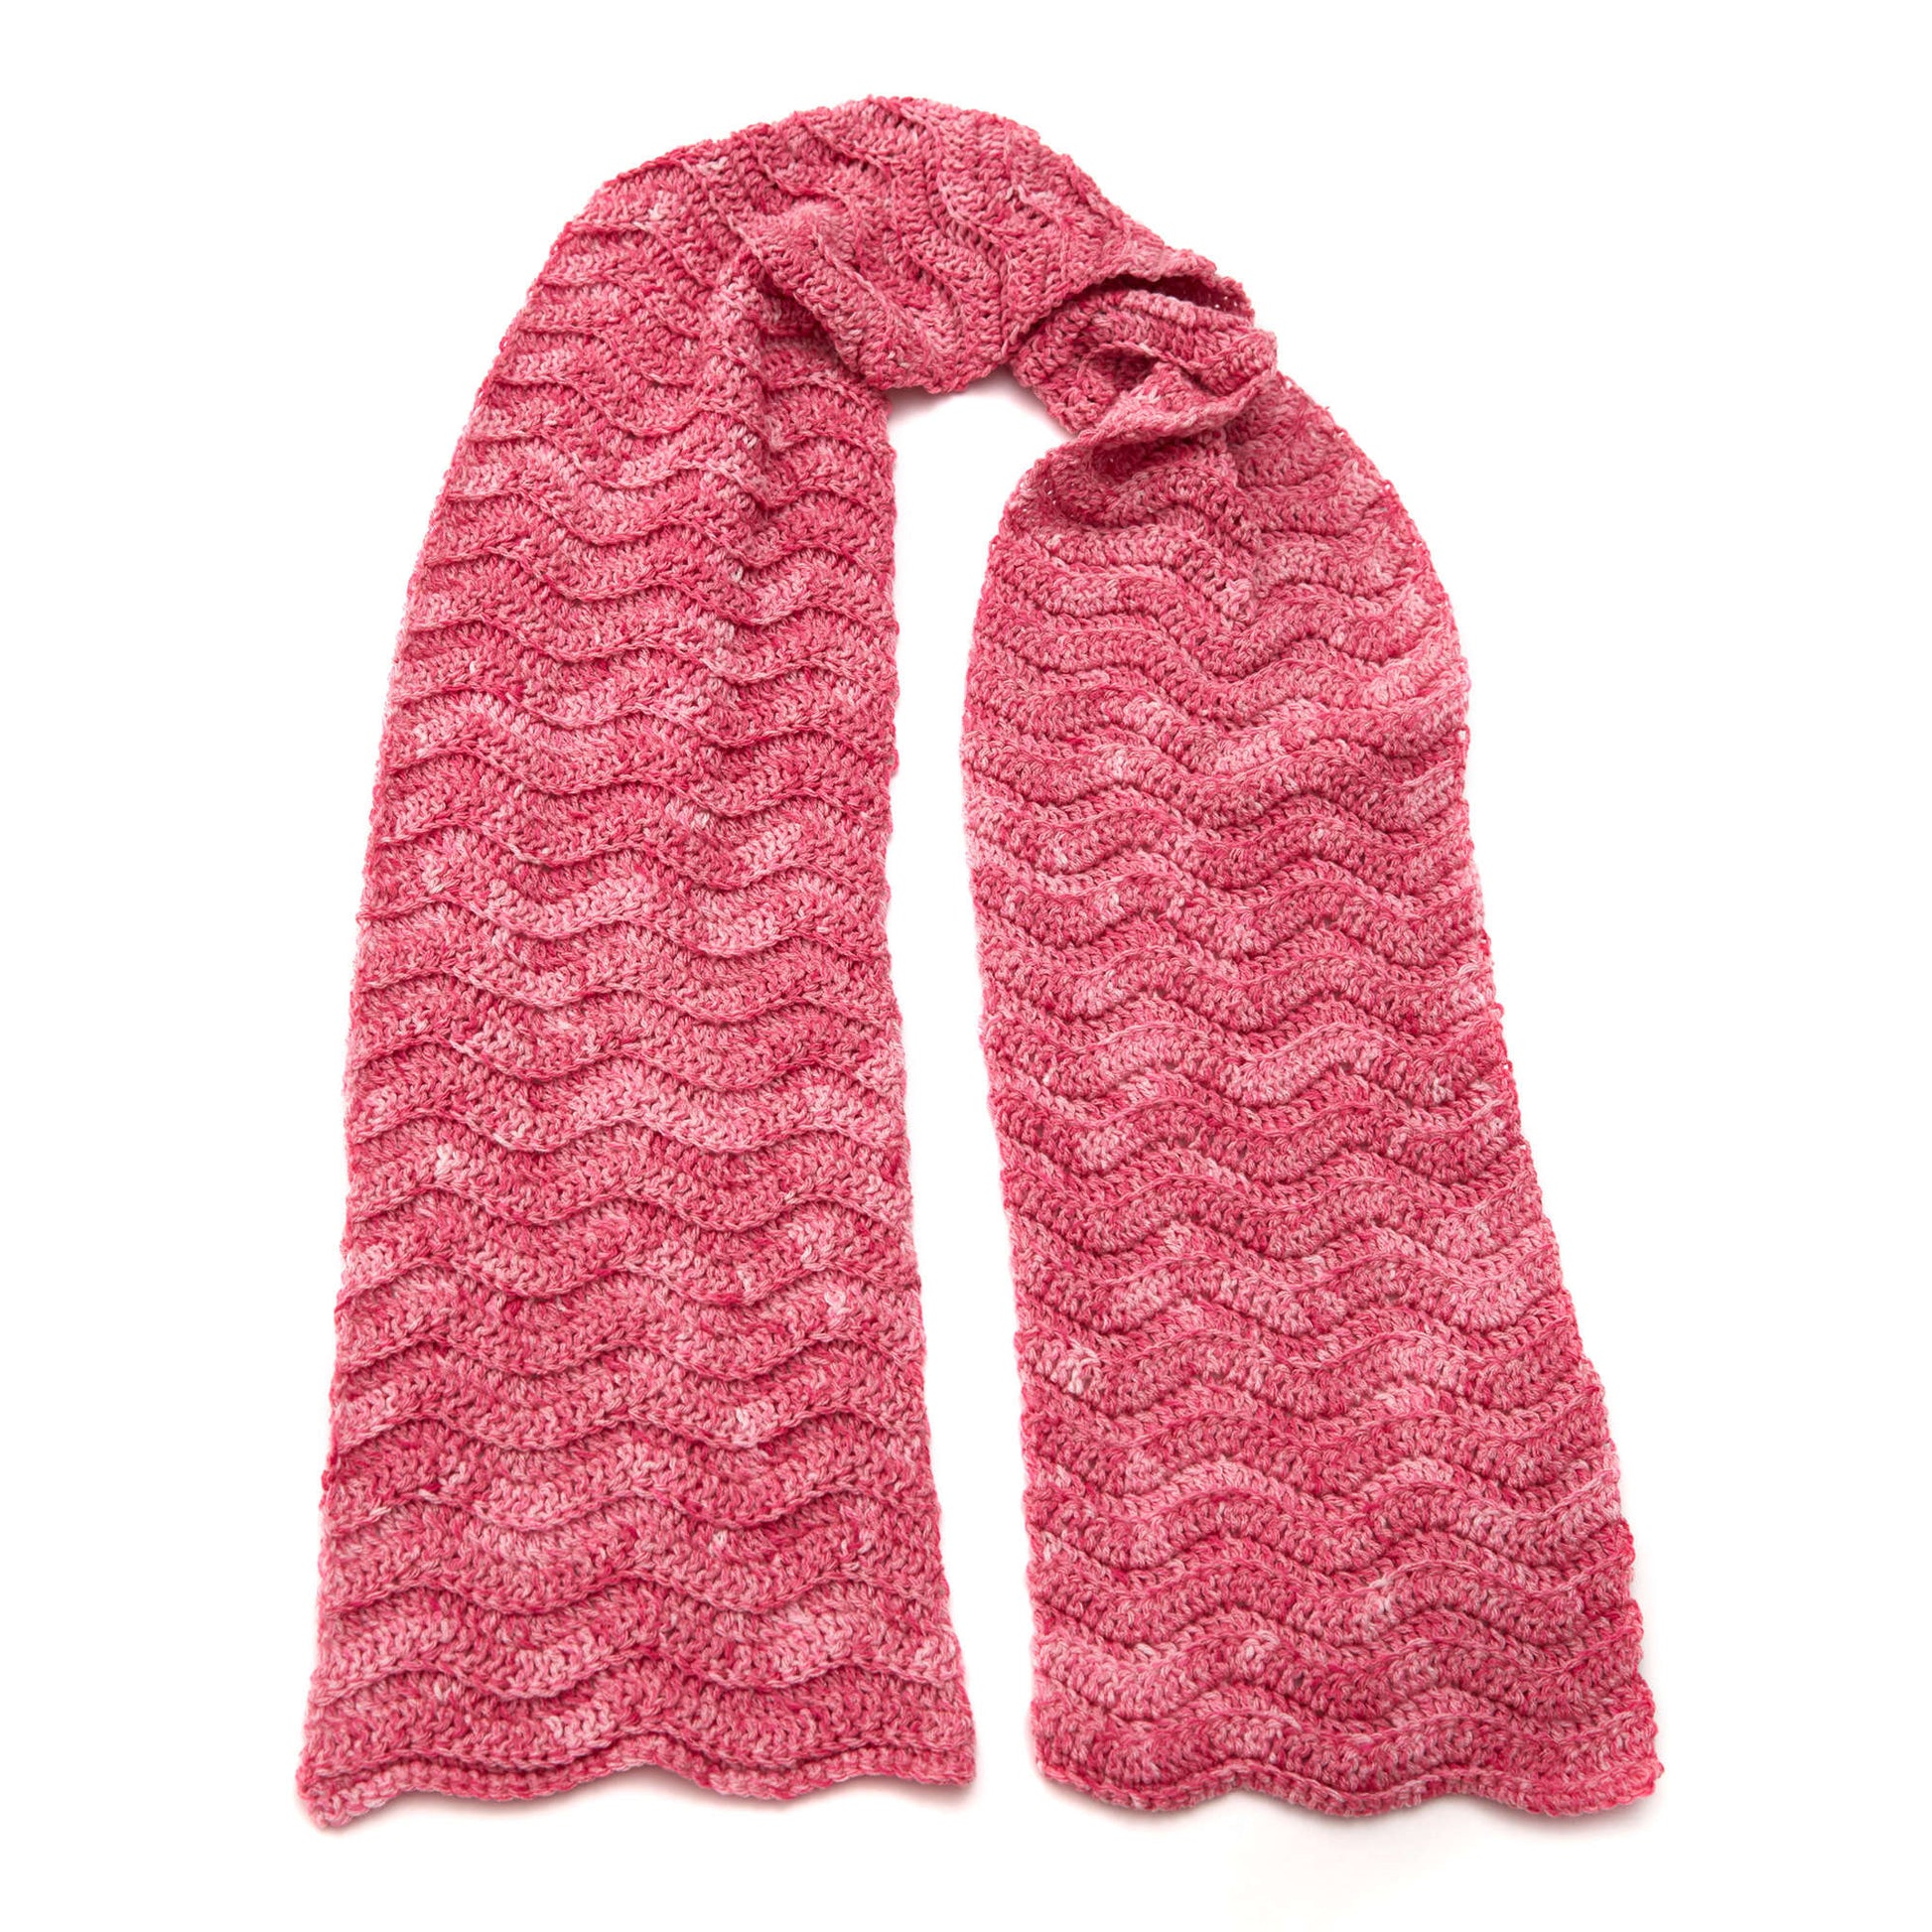 Free Red Heart Speckled Super Scarf Crochet Pattern